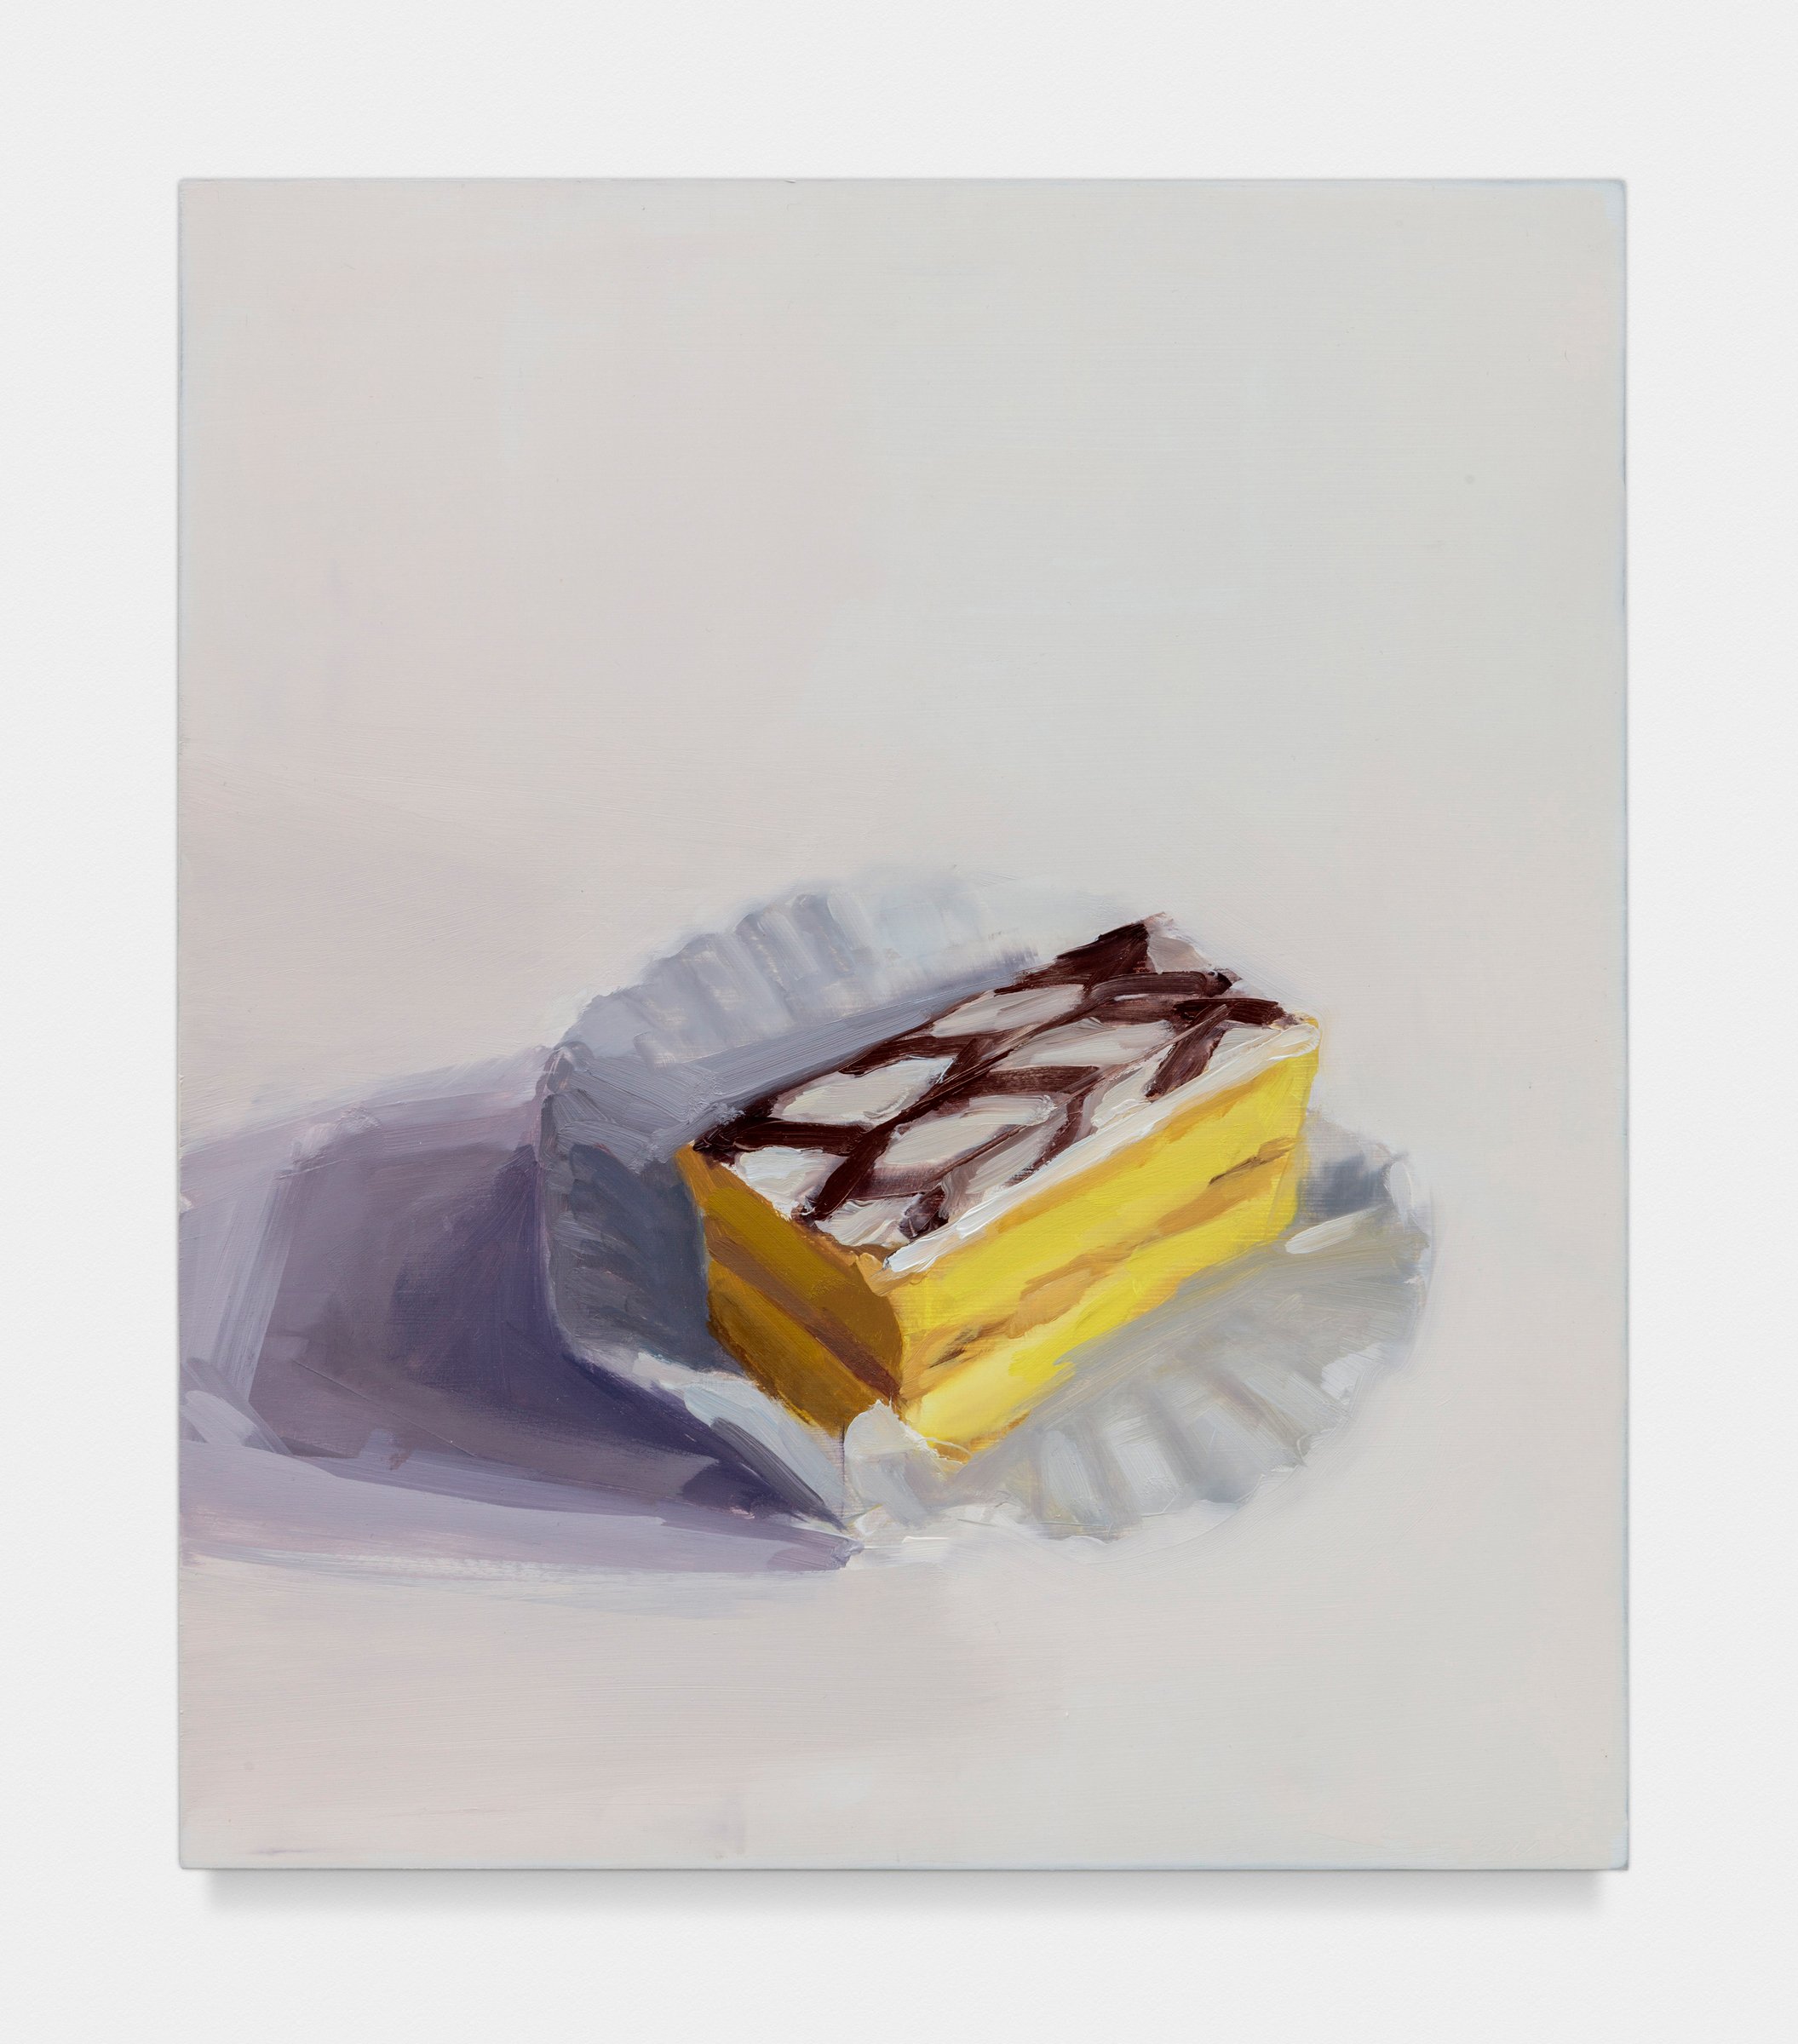  Carrie Mae Smith                                                                                                   Napoleon Pastry with Lattice Icing                                                                                              2022  